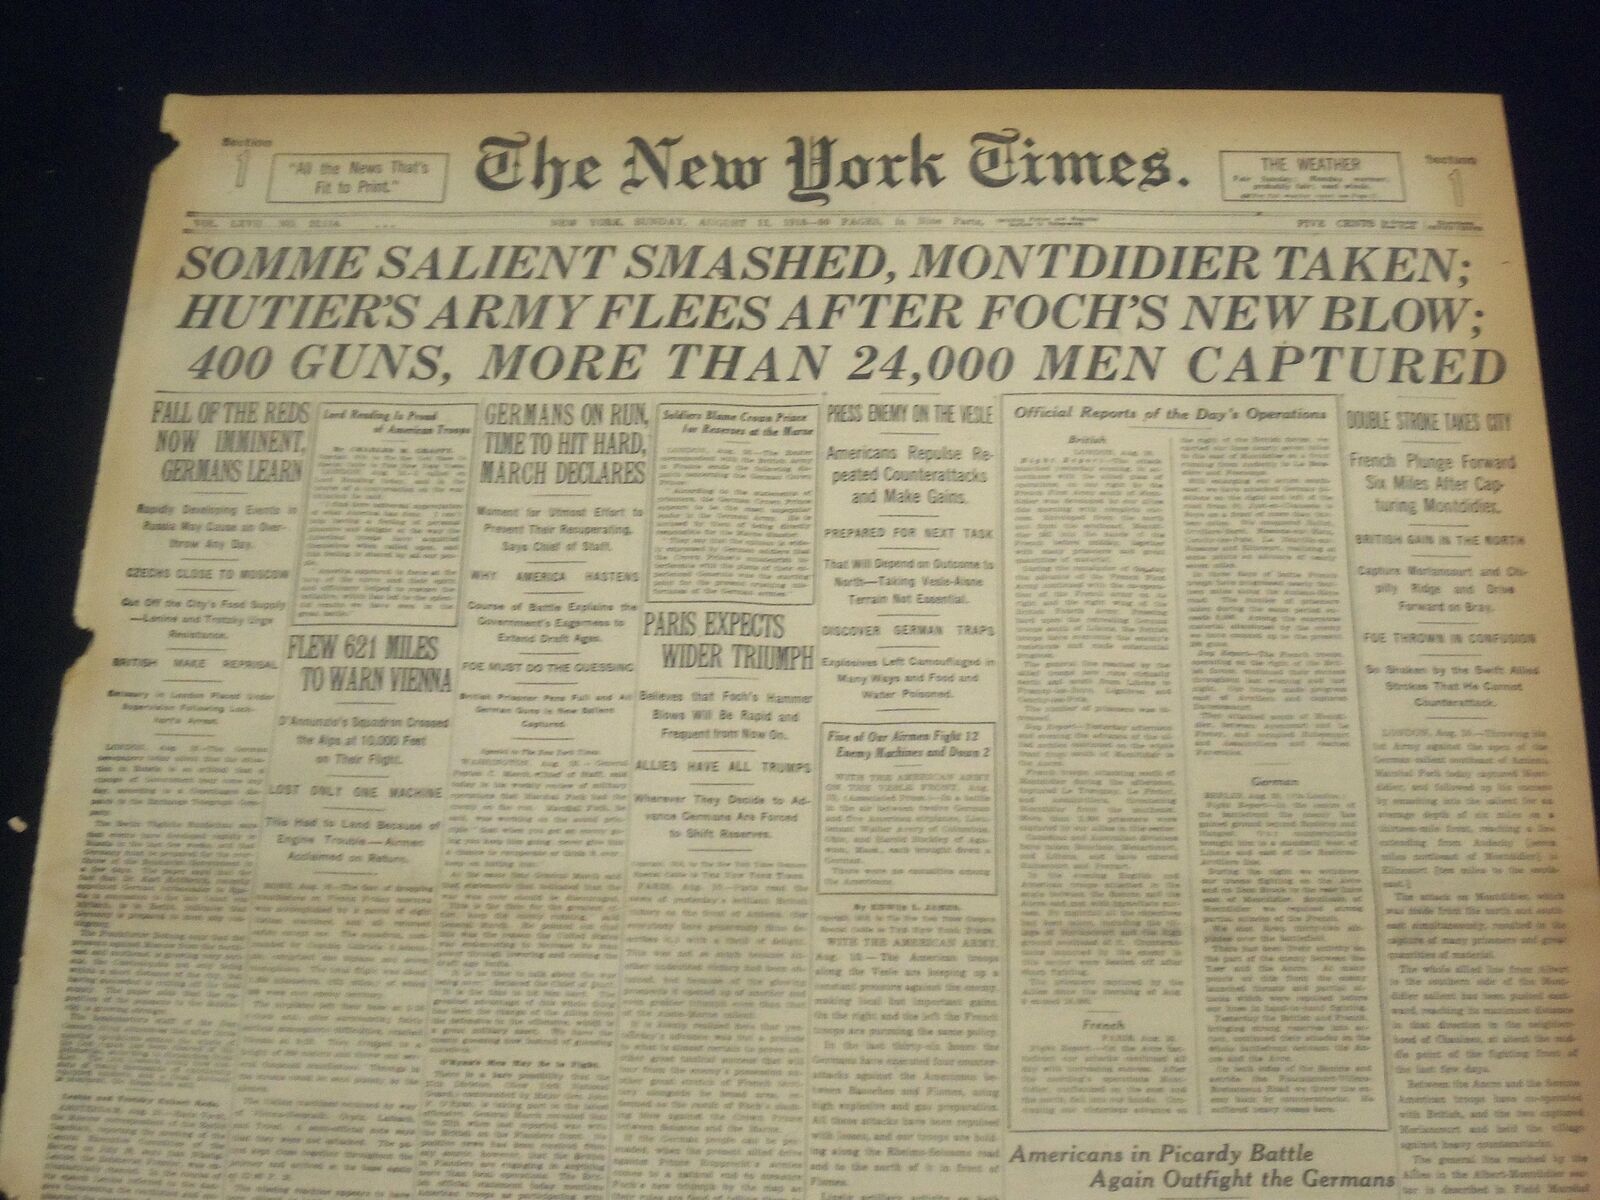 1918 AUGUST 11 NEW YORK TIMES - SOMME SALIENT SMASHED, MONTDIDIER TAKEN- NT 9191